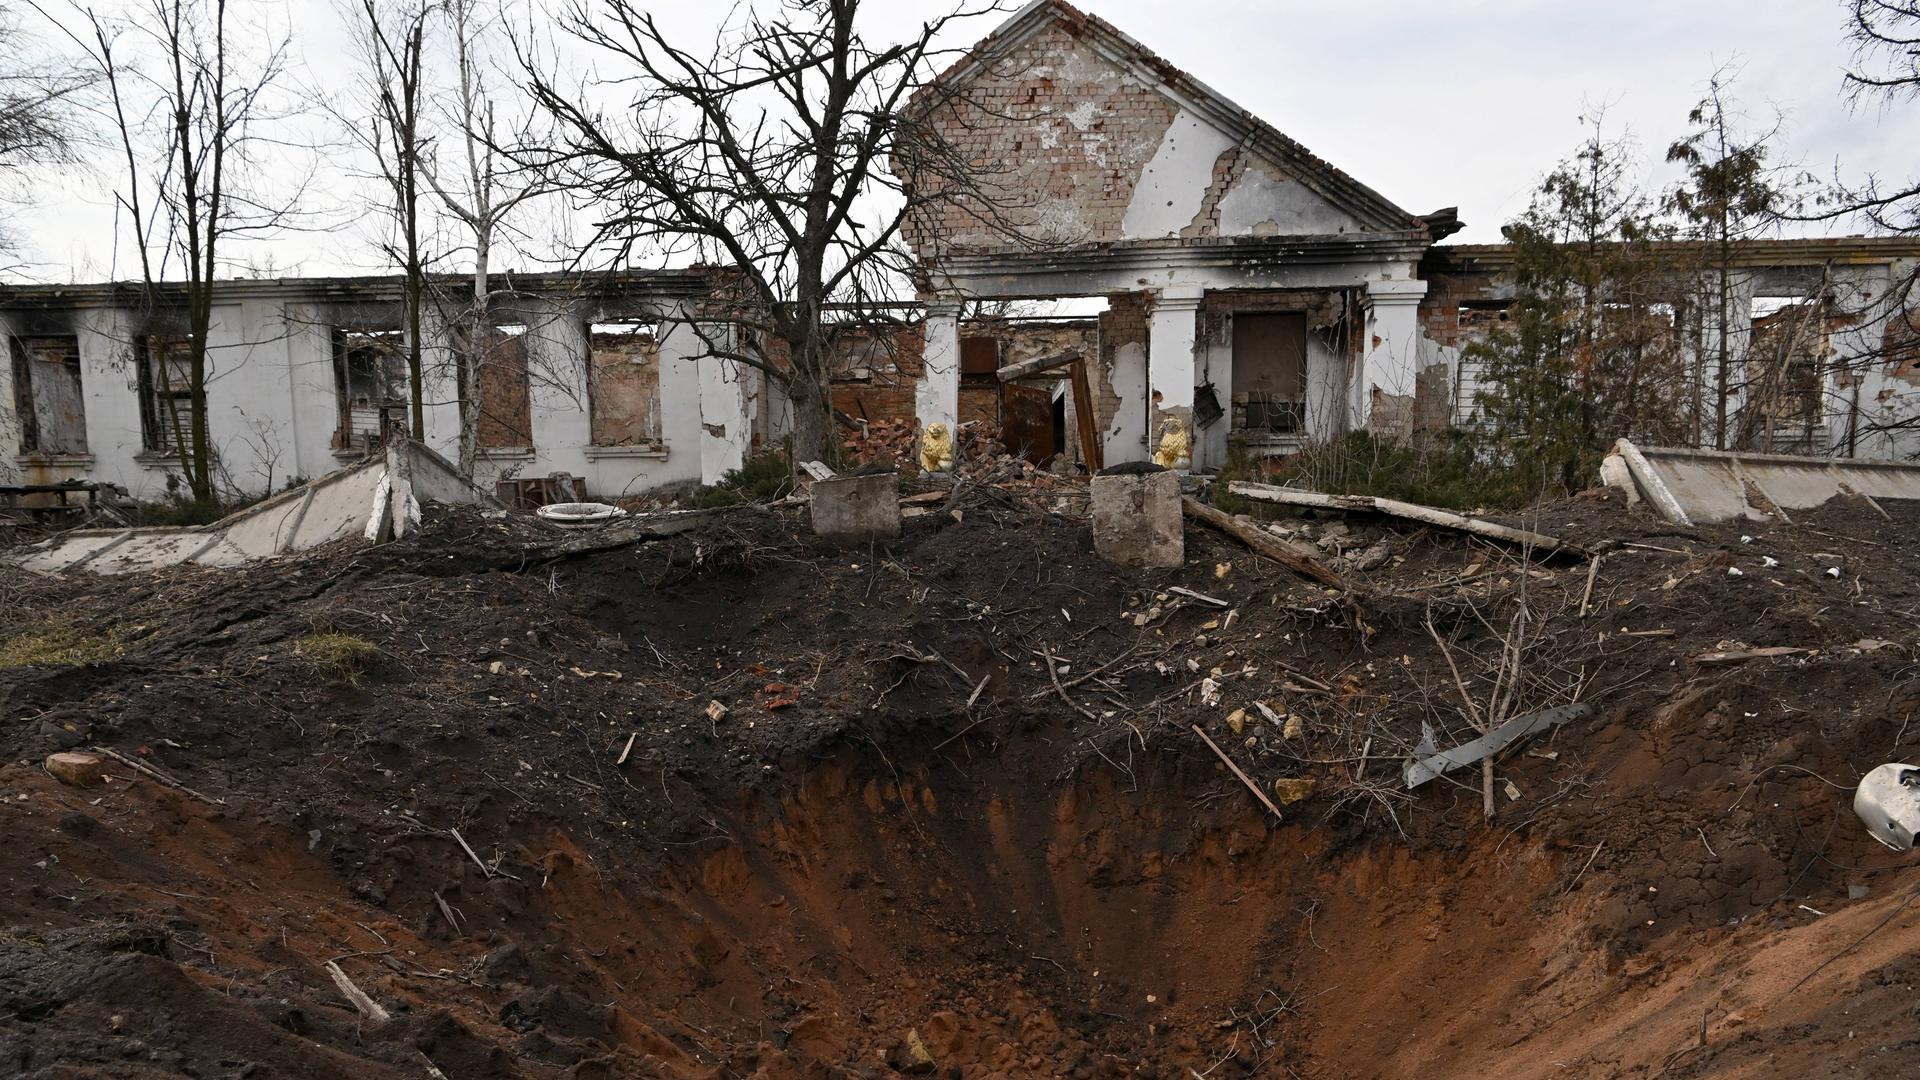 Russia Ukraine Military Operation Wagner Group 8389107 11.03.2023 A view shows a crater and a destroyed building outside Artemyovsk, also known as Bakhmut, as Russia s military operation in Ukraine continues, in Donetsk People s Republic, Russia. Evgeny Biyatov / Sputnik Donetsk People s Republic Russia PUBLICATIONxINxGERxSUIxAUTxONLY Copyright: xEvgenyxBiyatovx